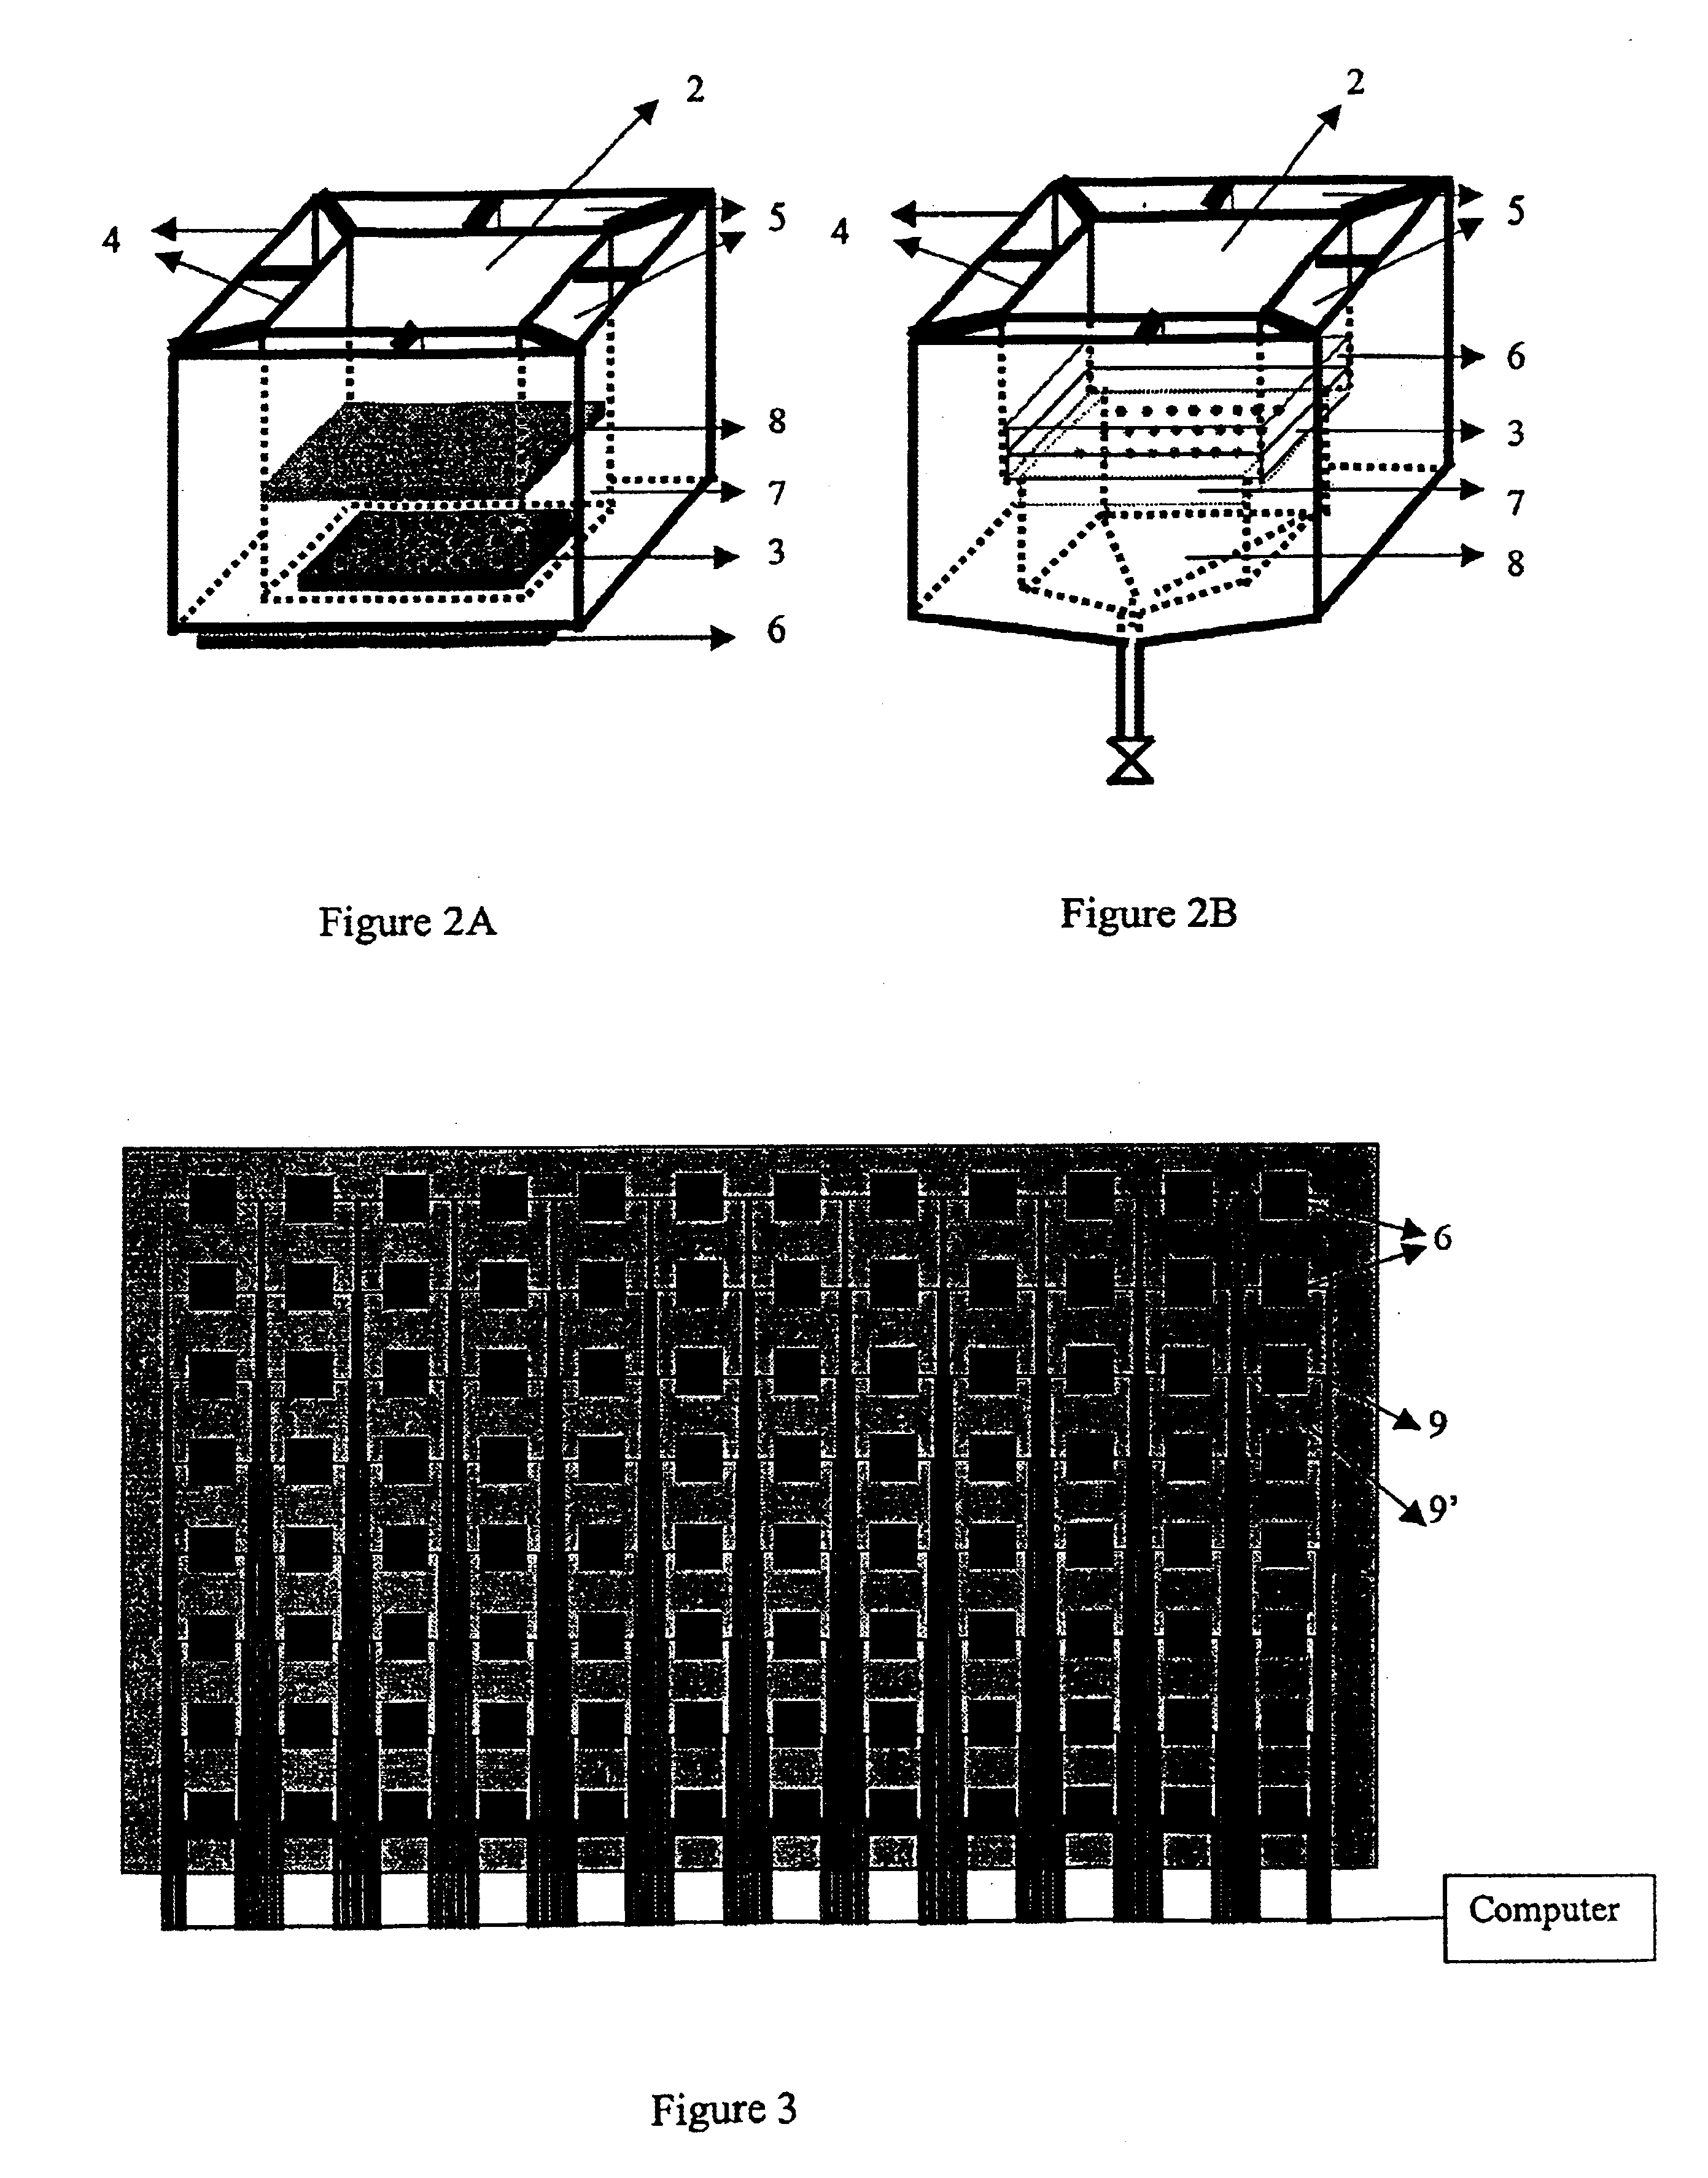 Integrated microarray devices